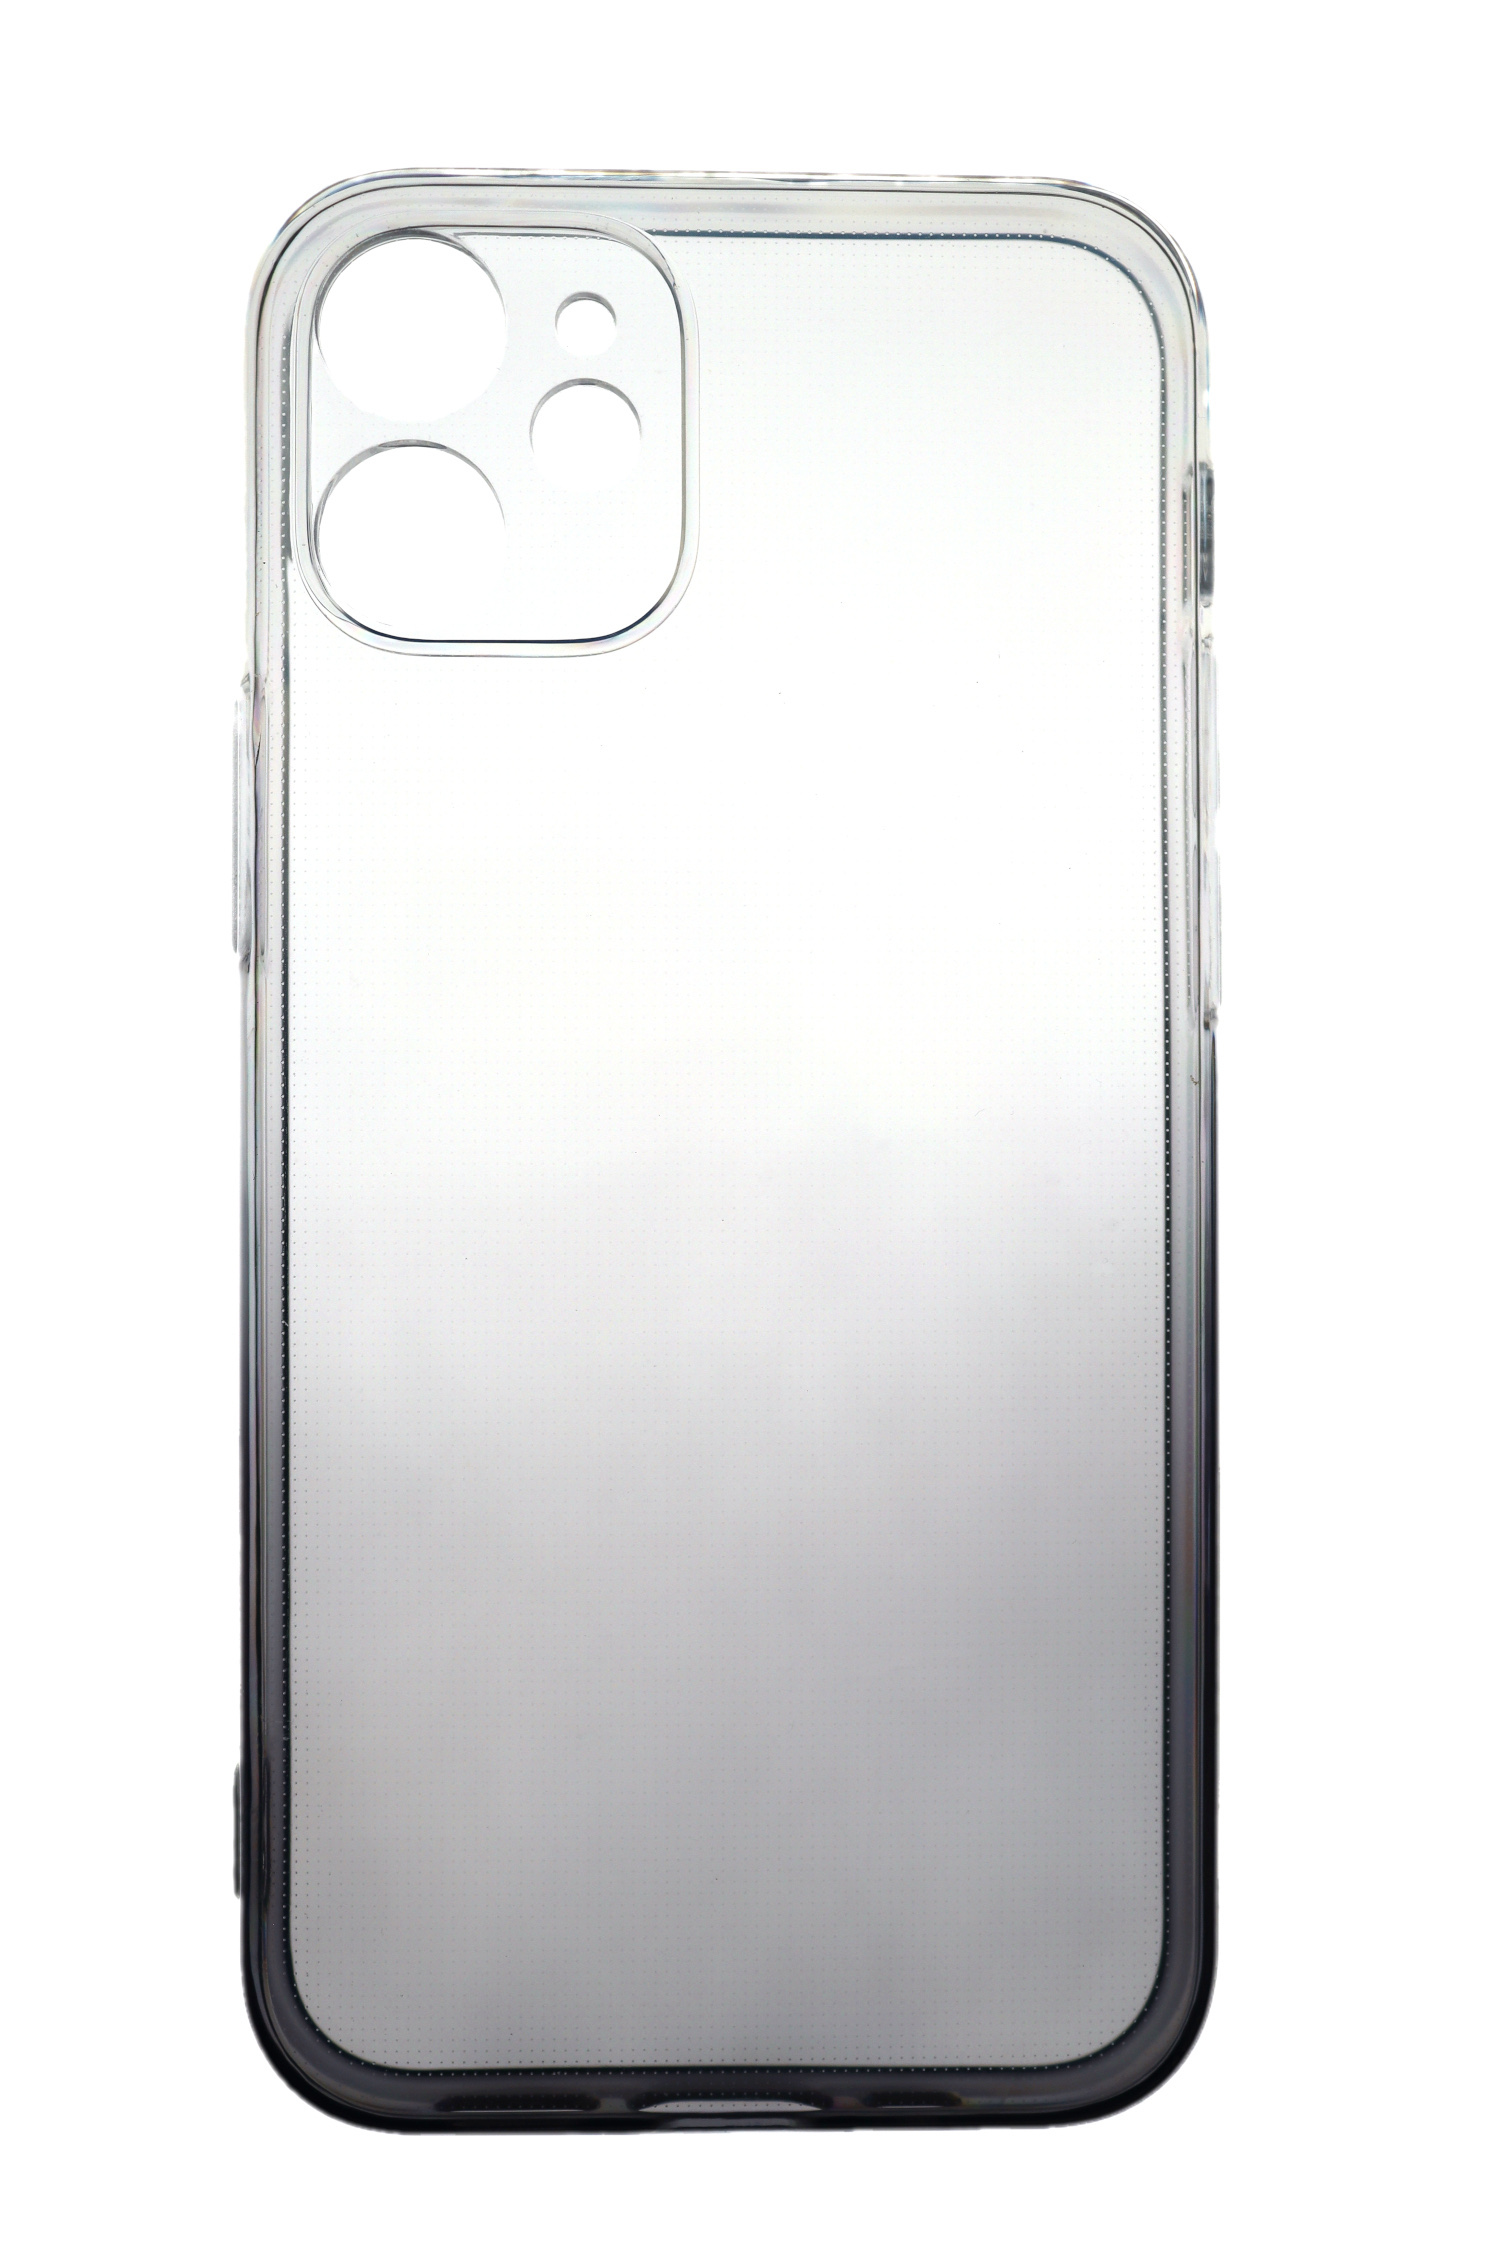 JAMCOVER Case Apple, 2.0 11, Backcover, mm Transparent TPU Grau, iPhone Strong,